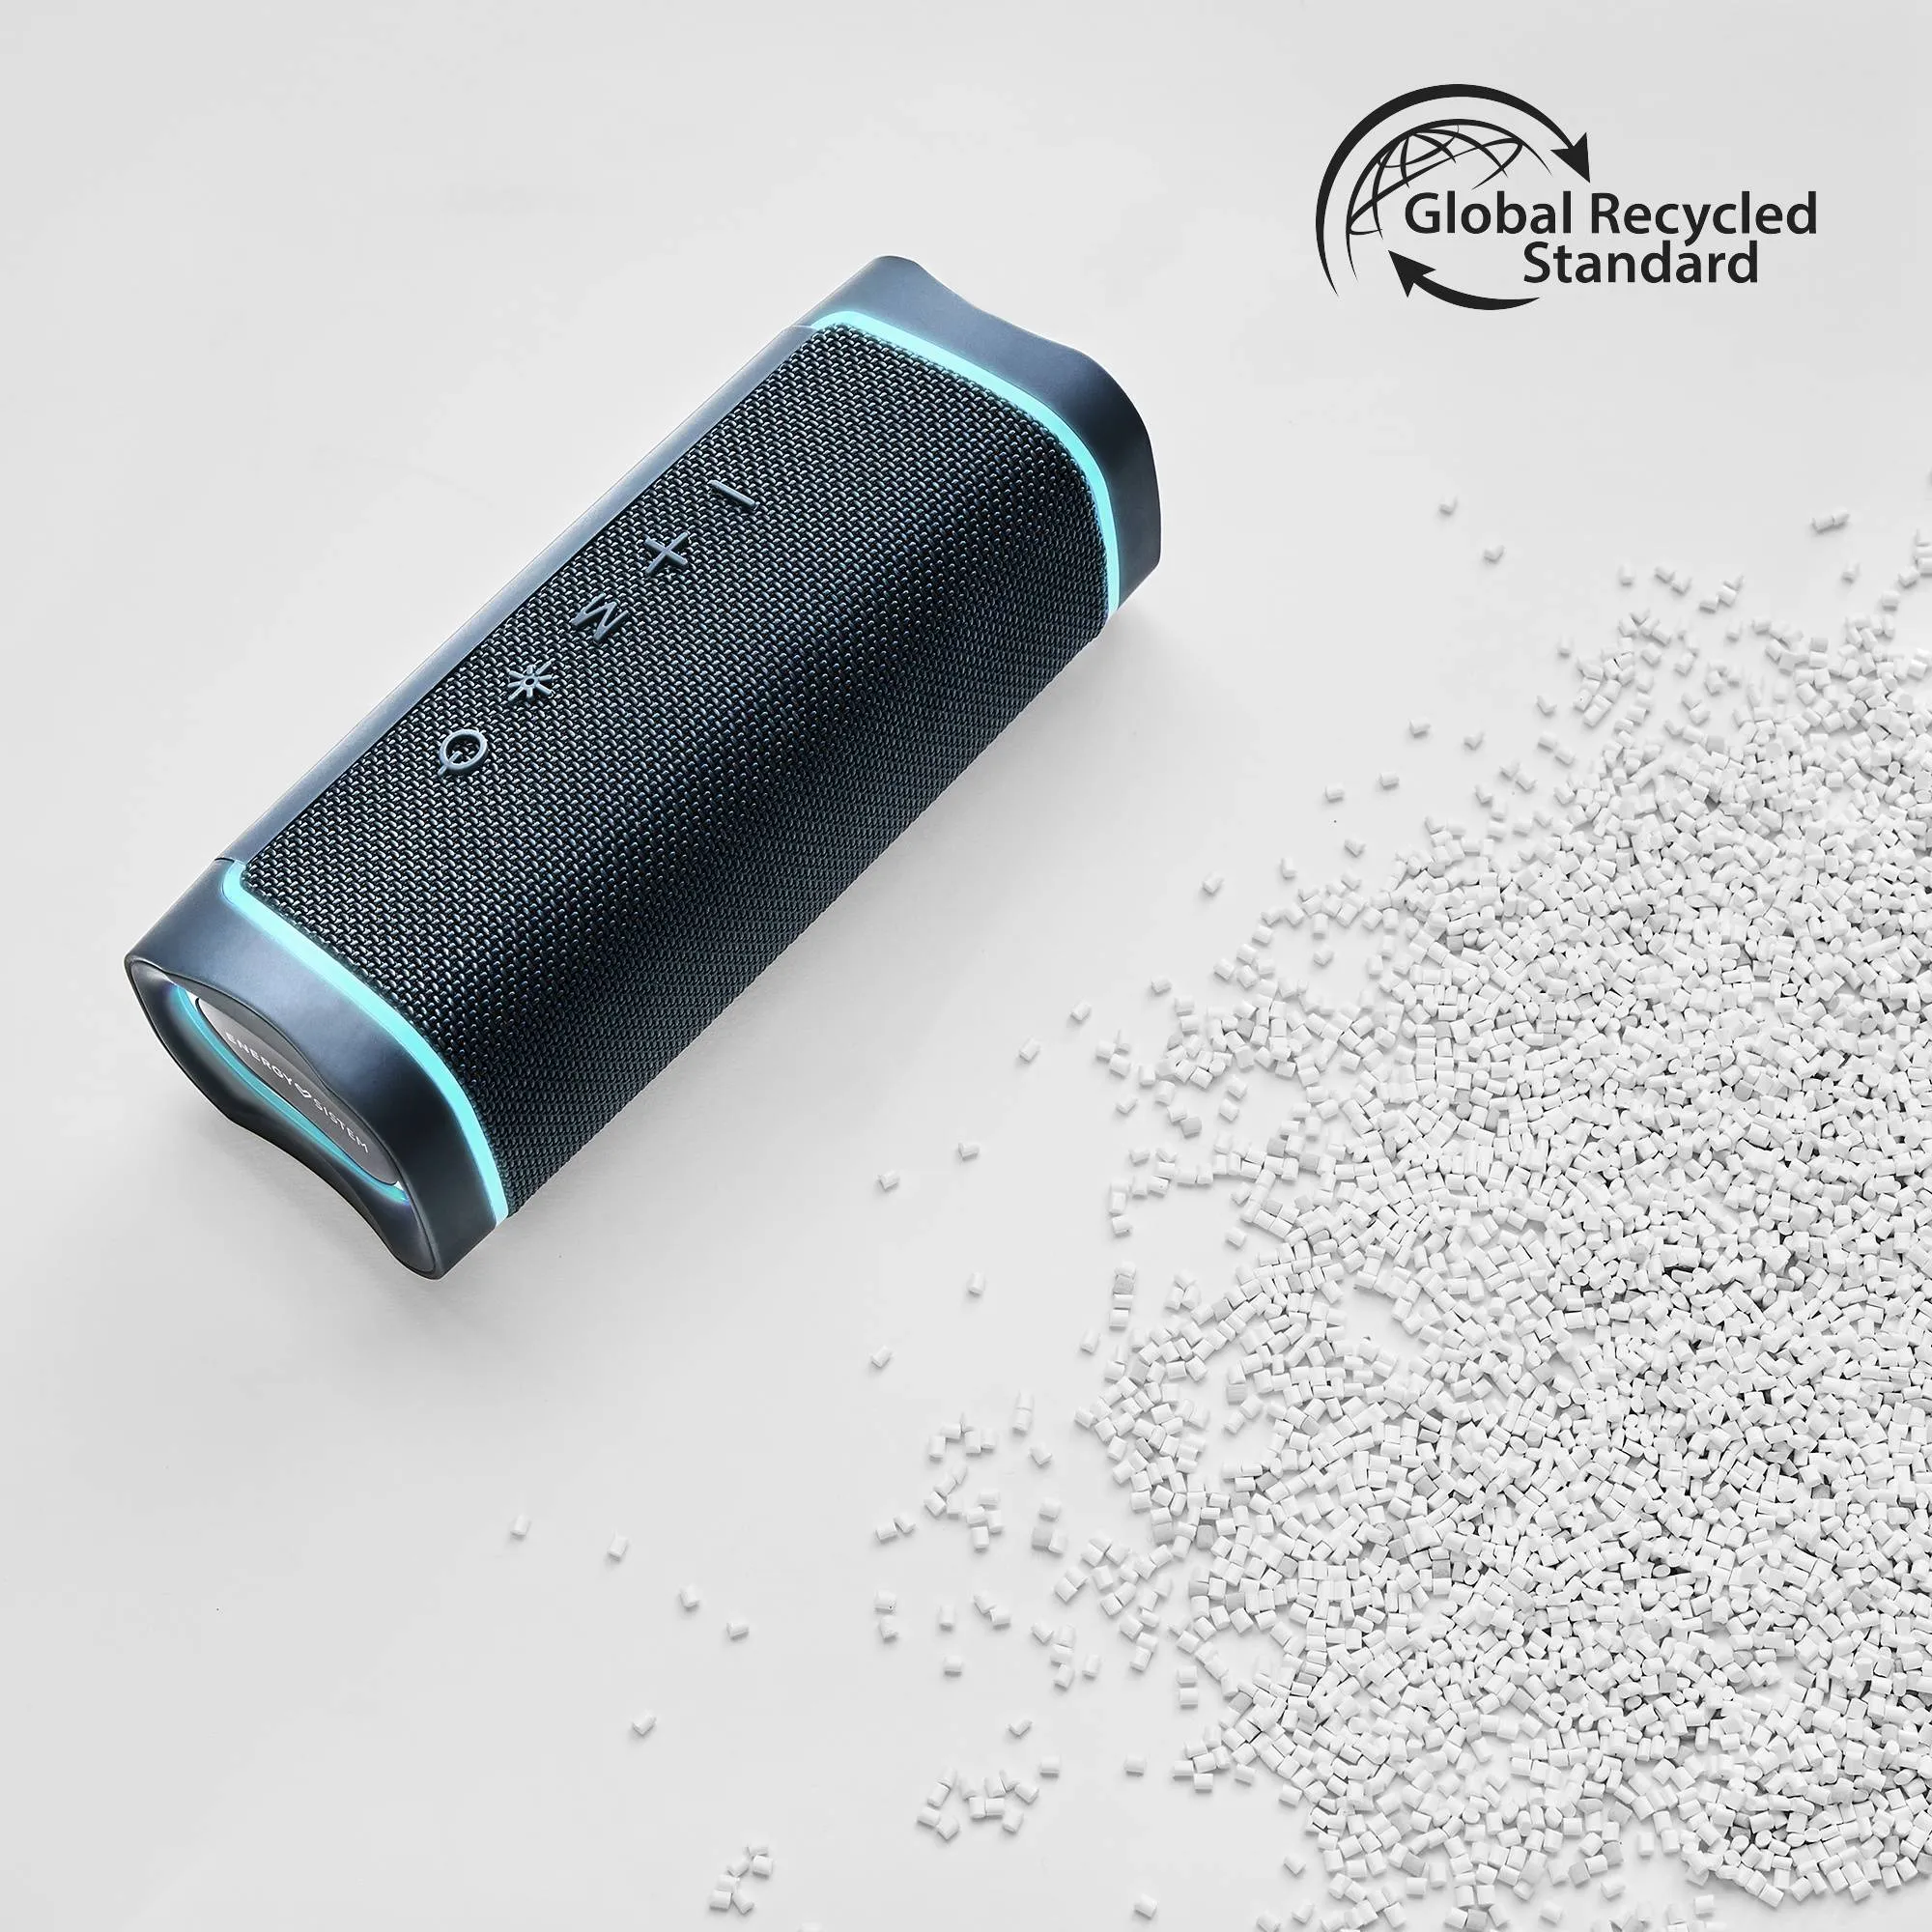 Nami ECO Bluetooth speaker made from 100% recycled plastic